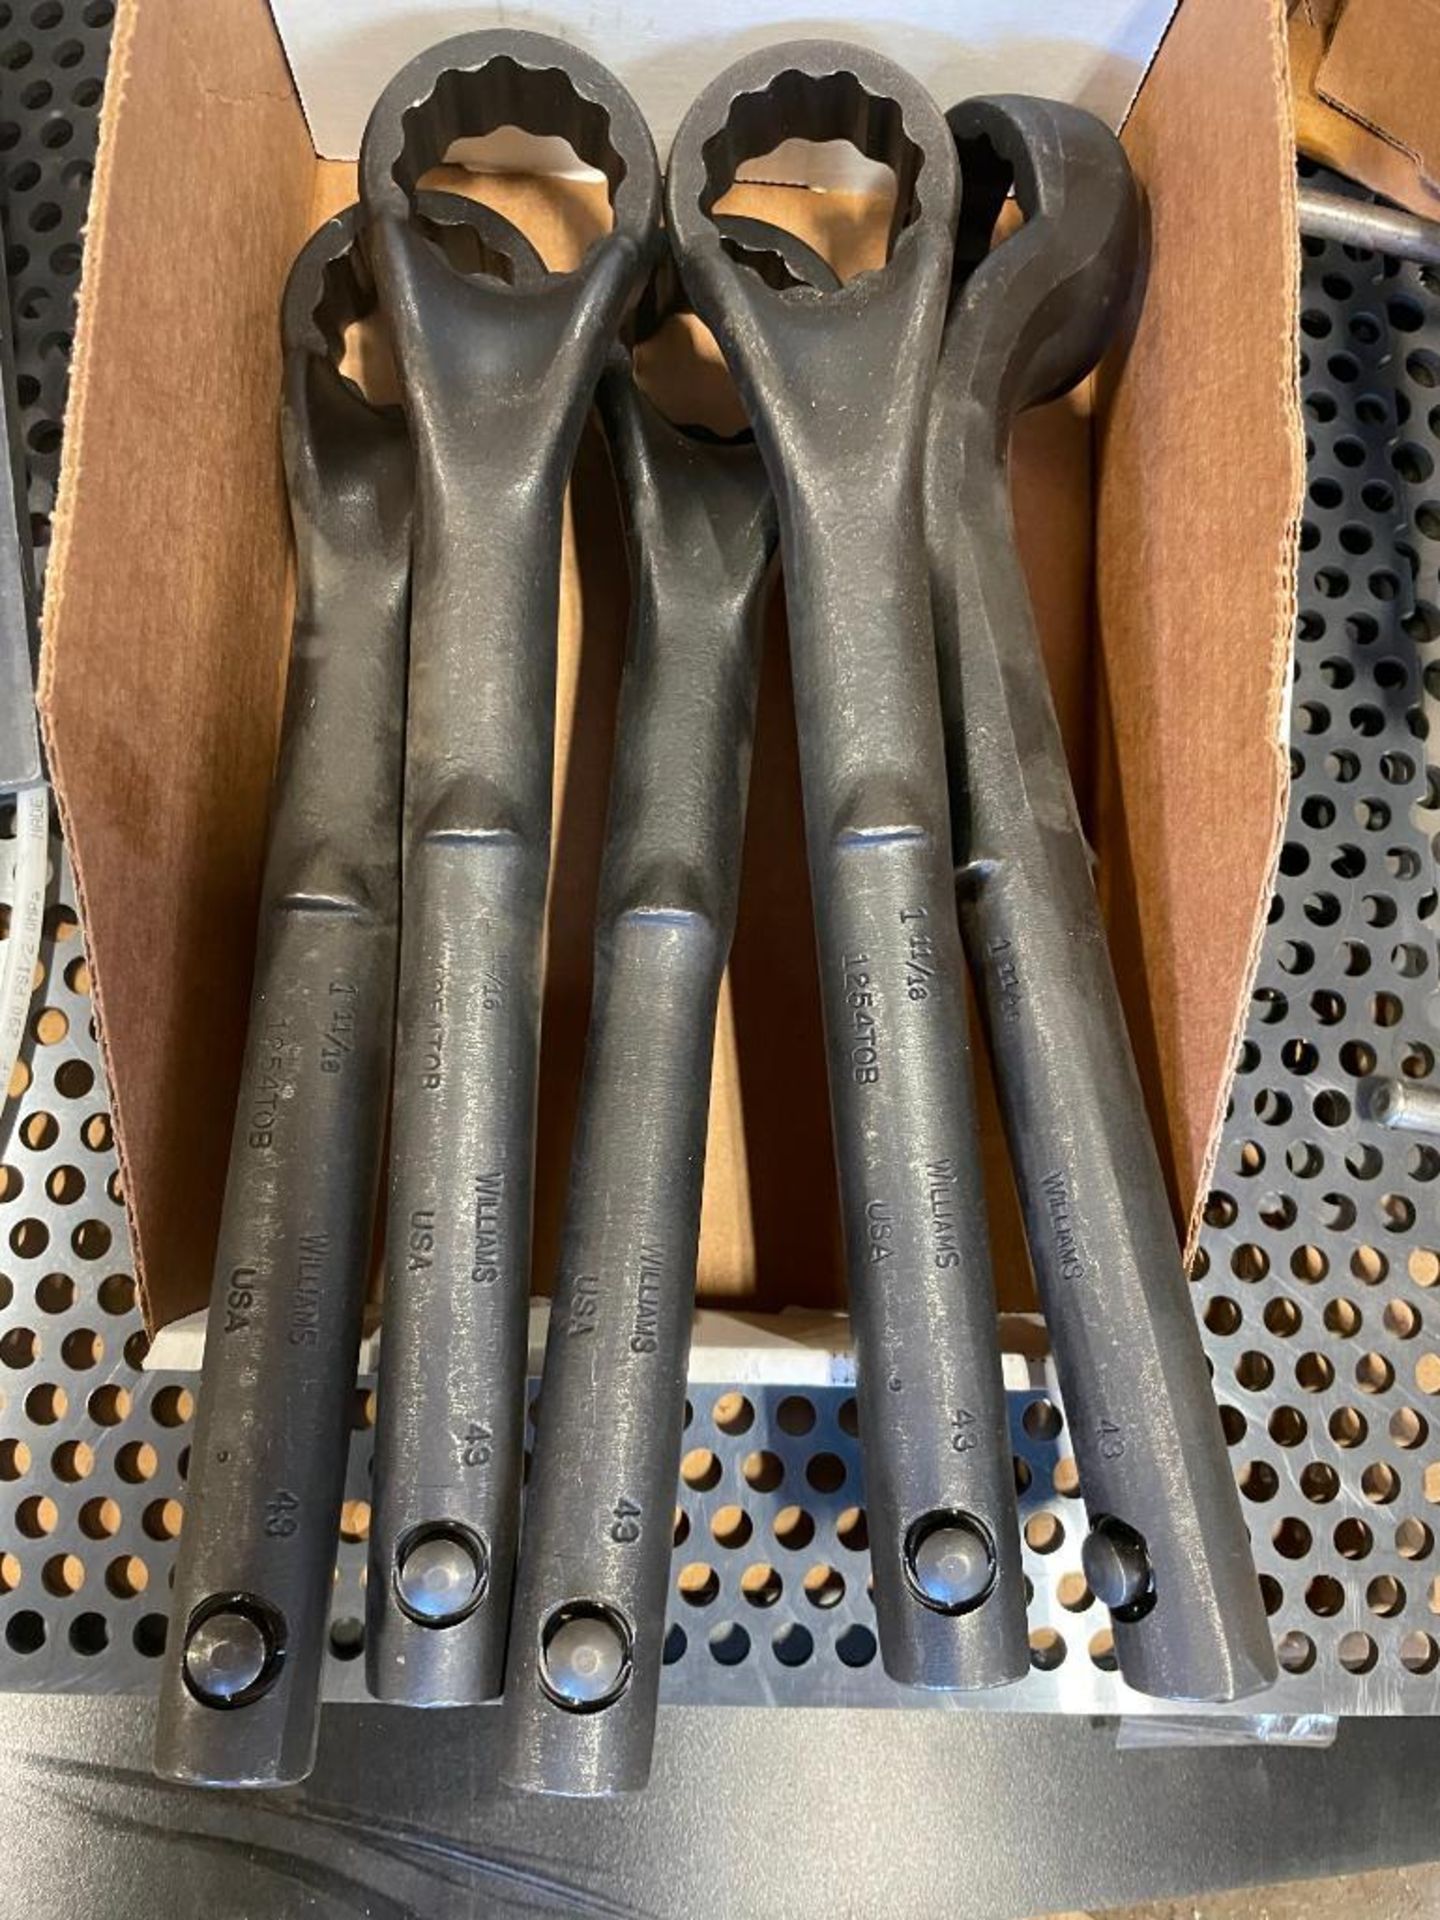 (LOT) WILLIAMS USA 1-11/16"" WRENCHES